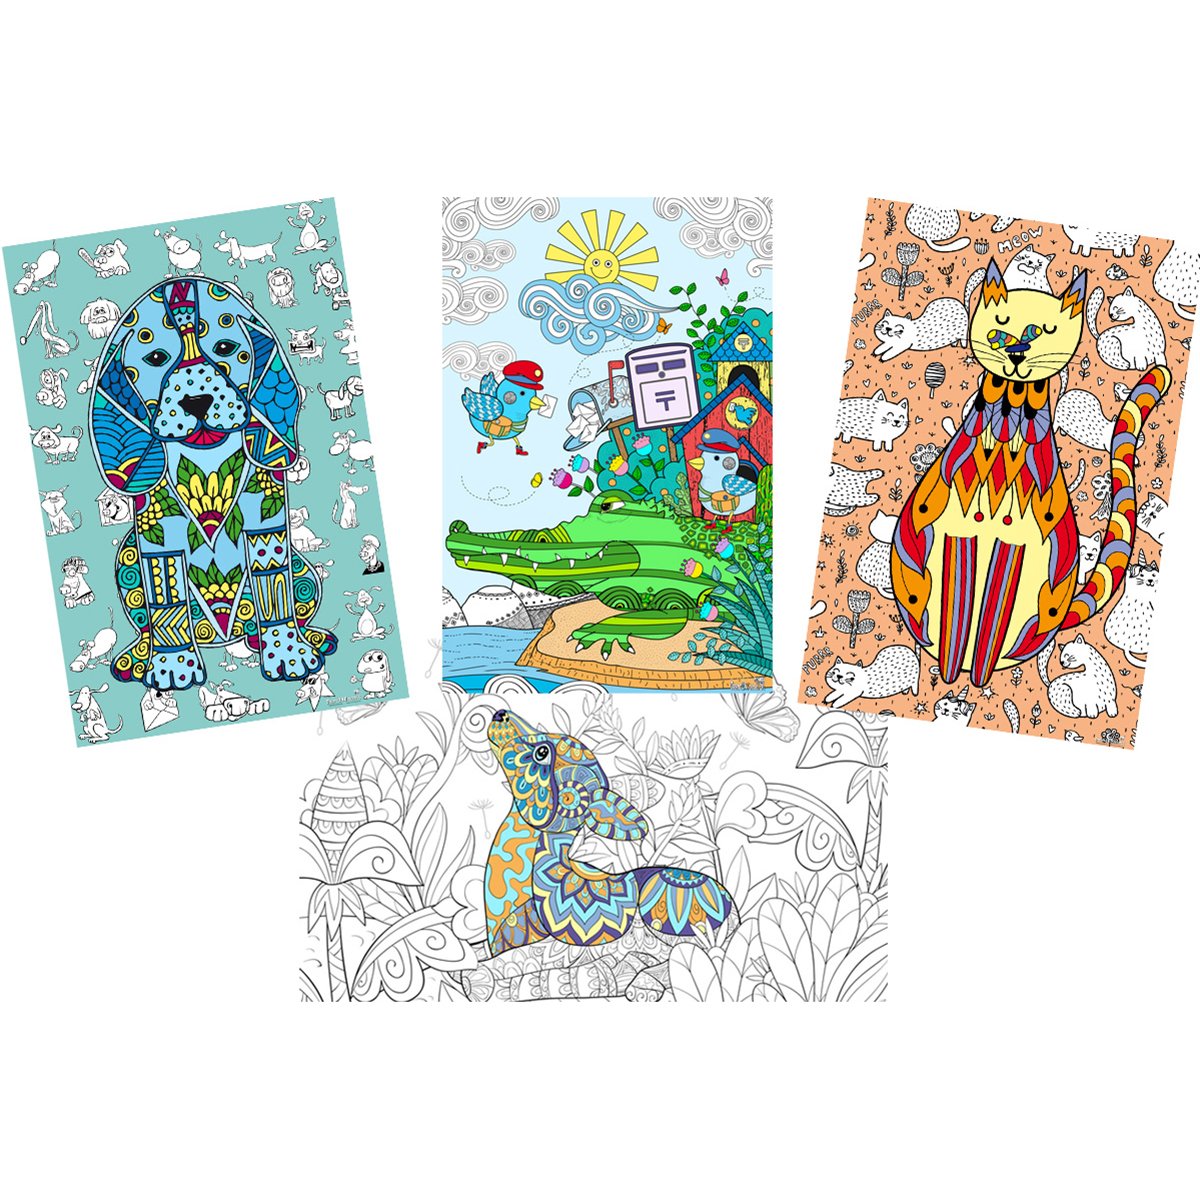 Great2bColorful - 24" x 16" Just For Fun, 4-Pack Coloring Posters